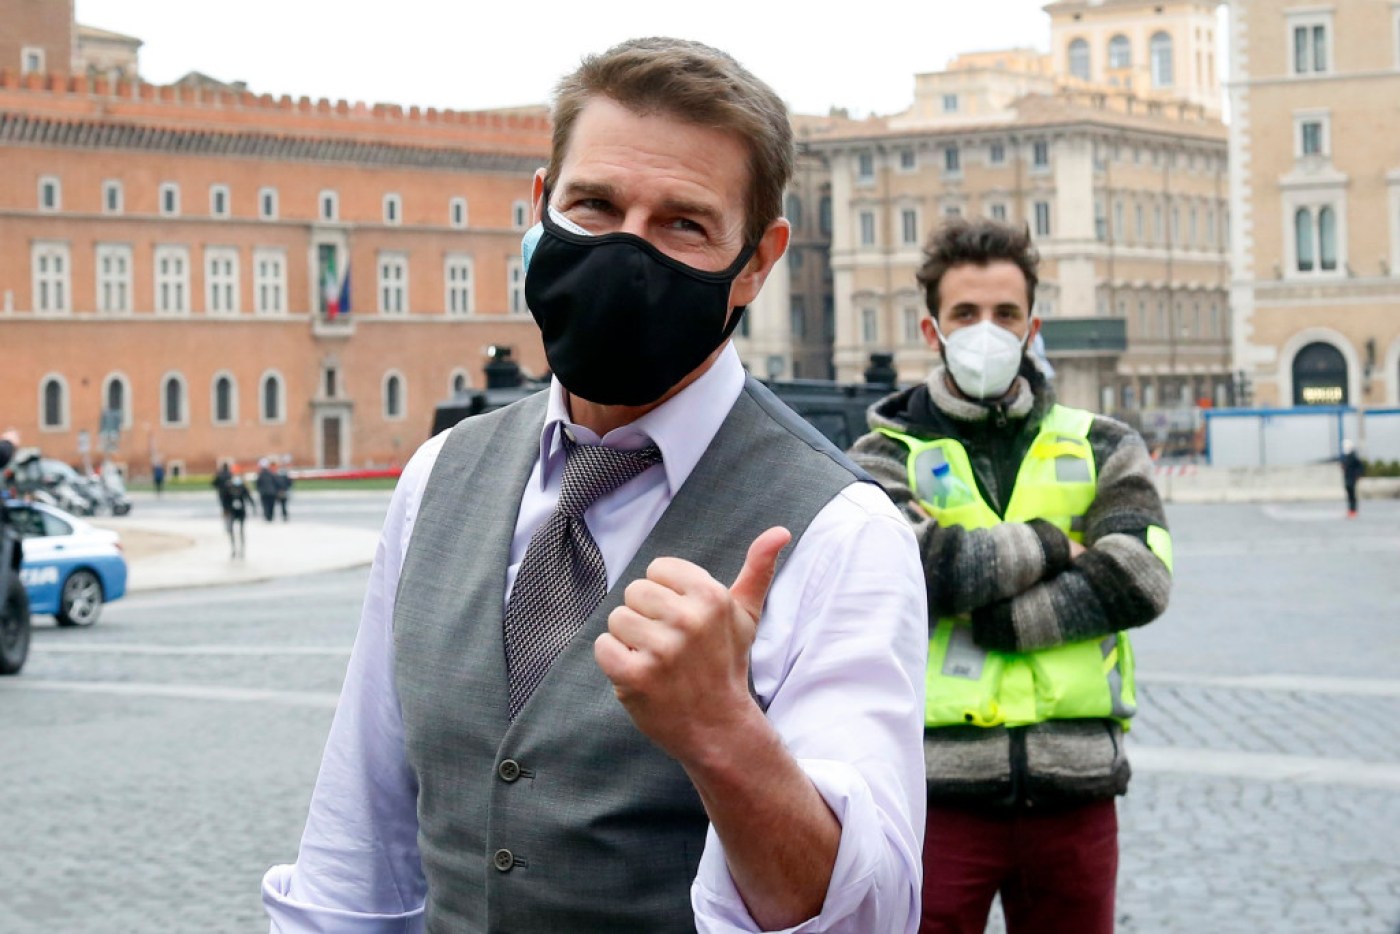 Tom Cruise wearing two face masks on set of Mission: Impossible 7 in Rome